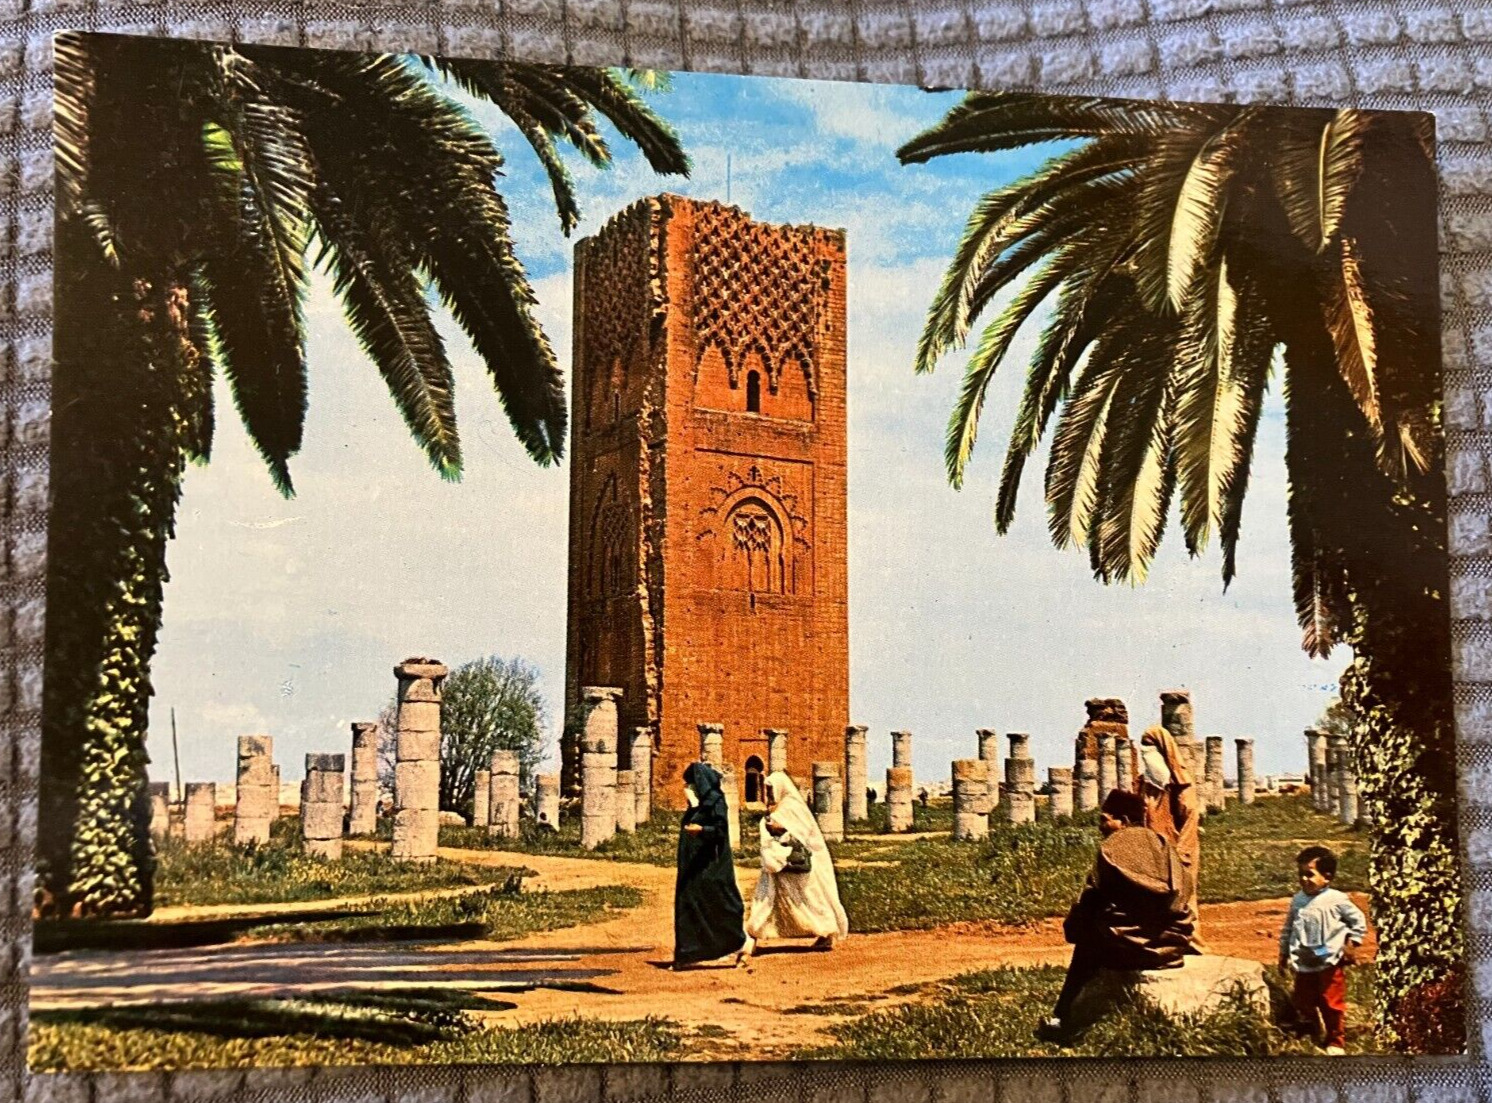 Vintage Continental Postcard - The Hassan Tower Minaret in Rabat, Morocco